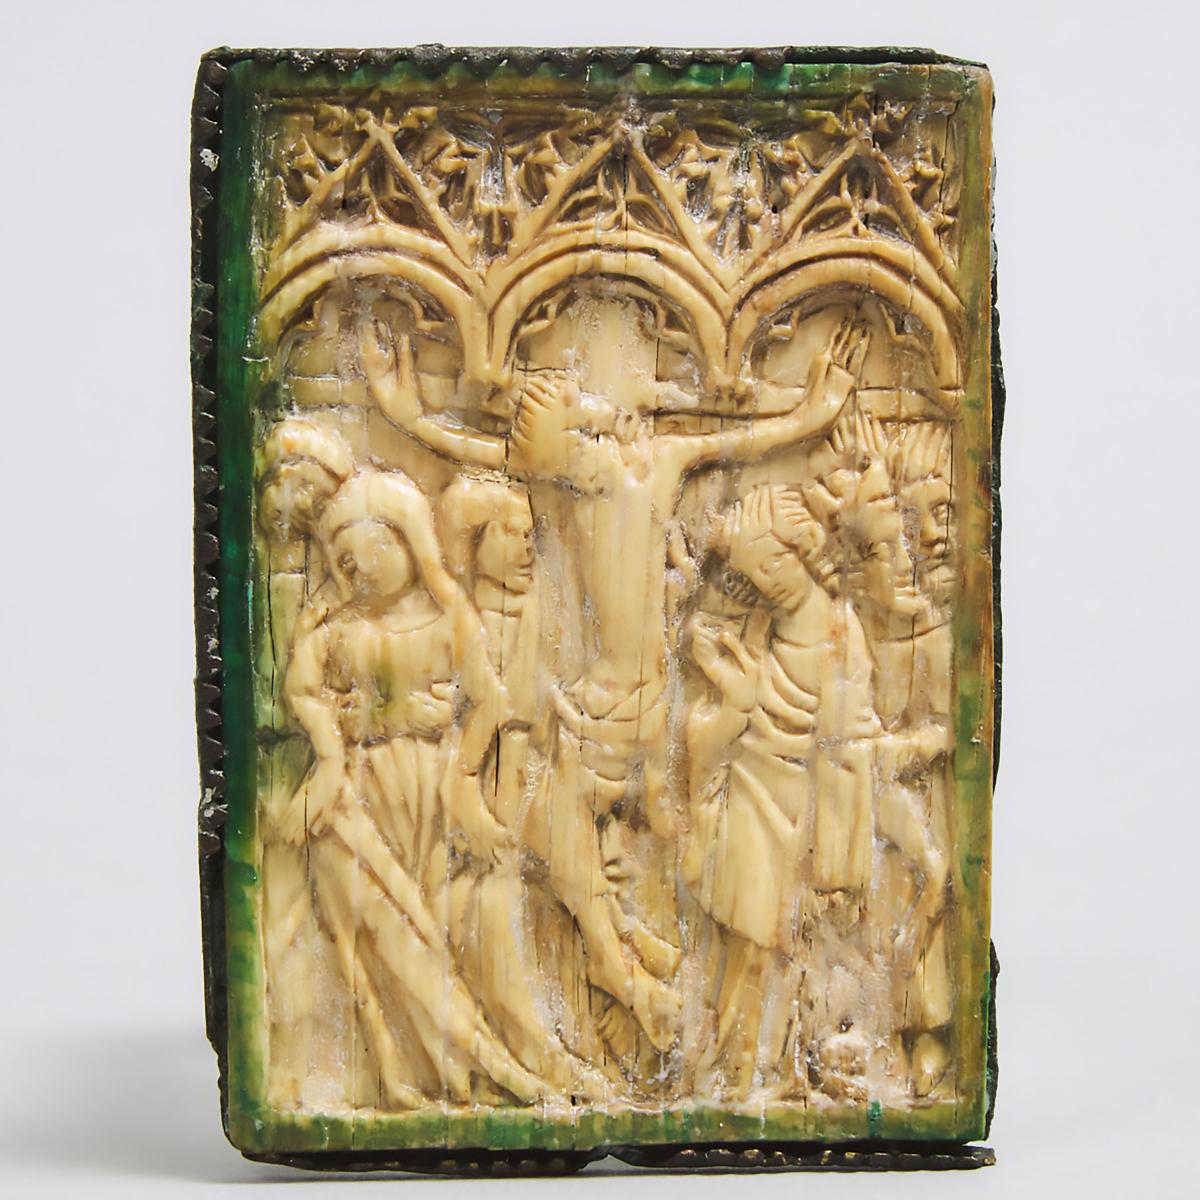 French Gothic Relief Carved Ivory Panel of the Crucifixion, 14th century, 3 x 2.2 in — 7.5 x 5.5 cm